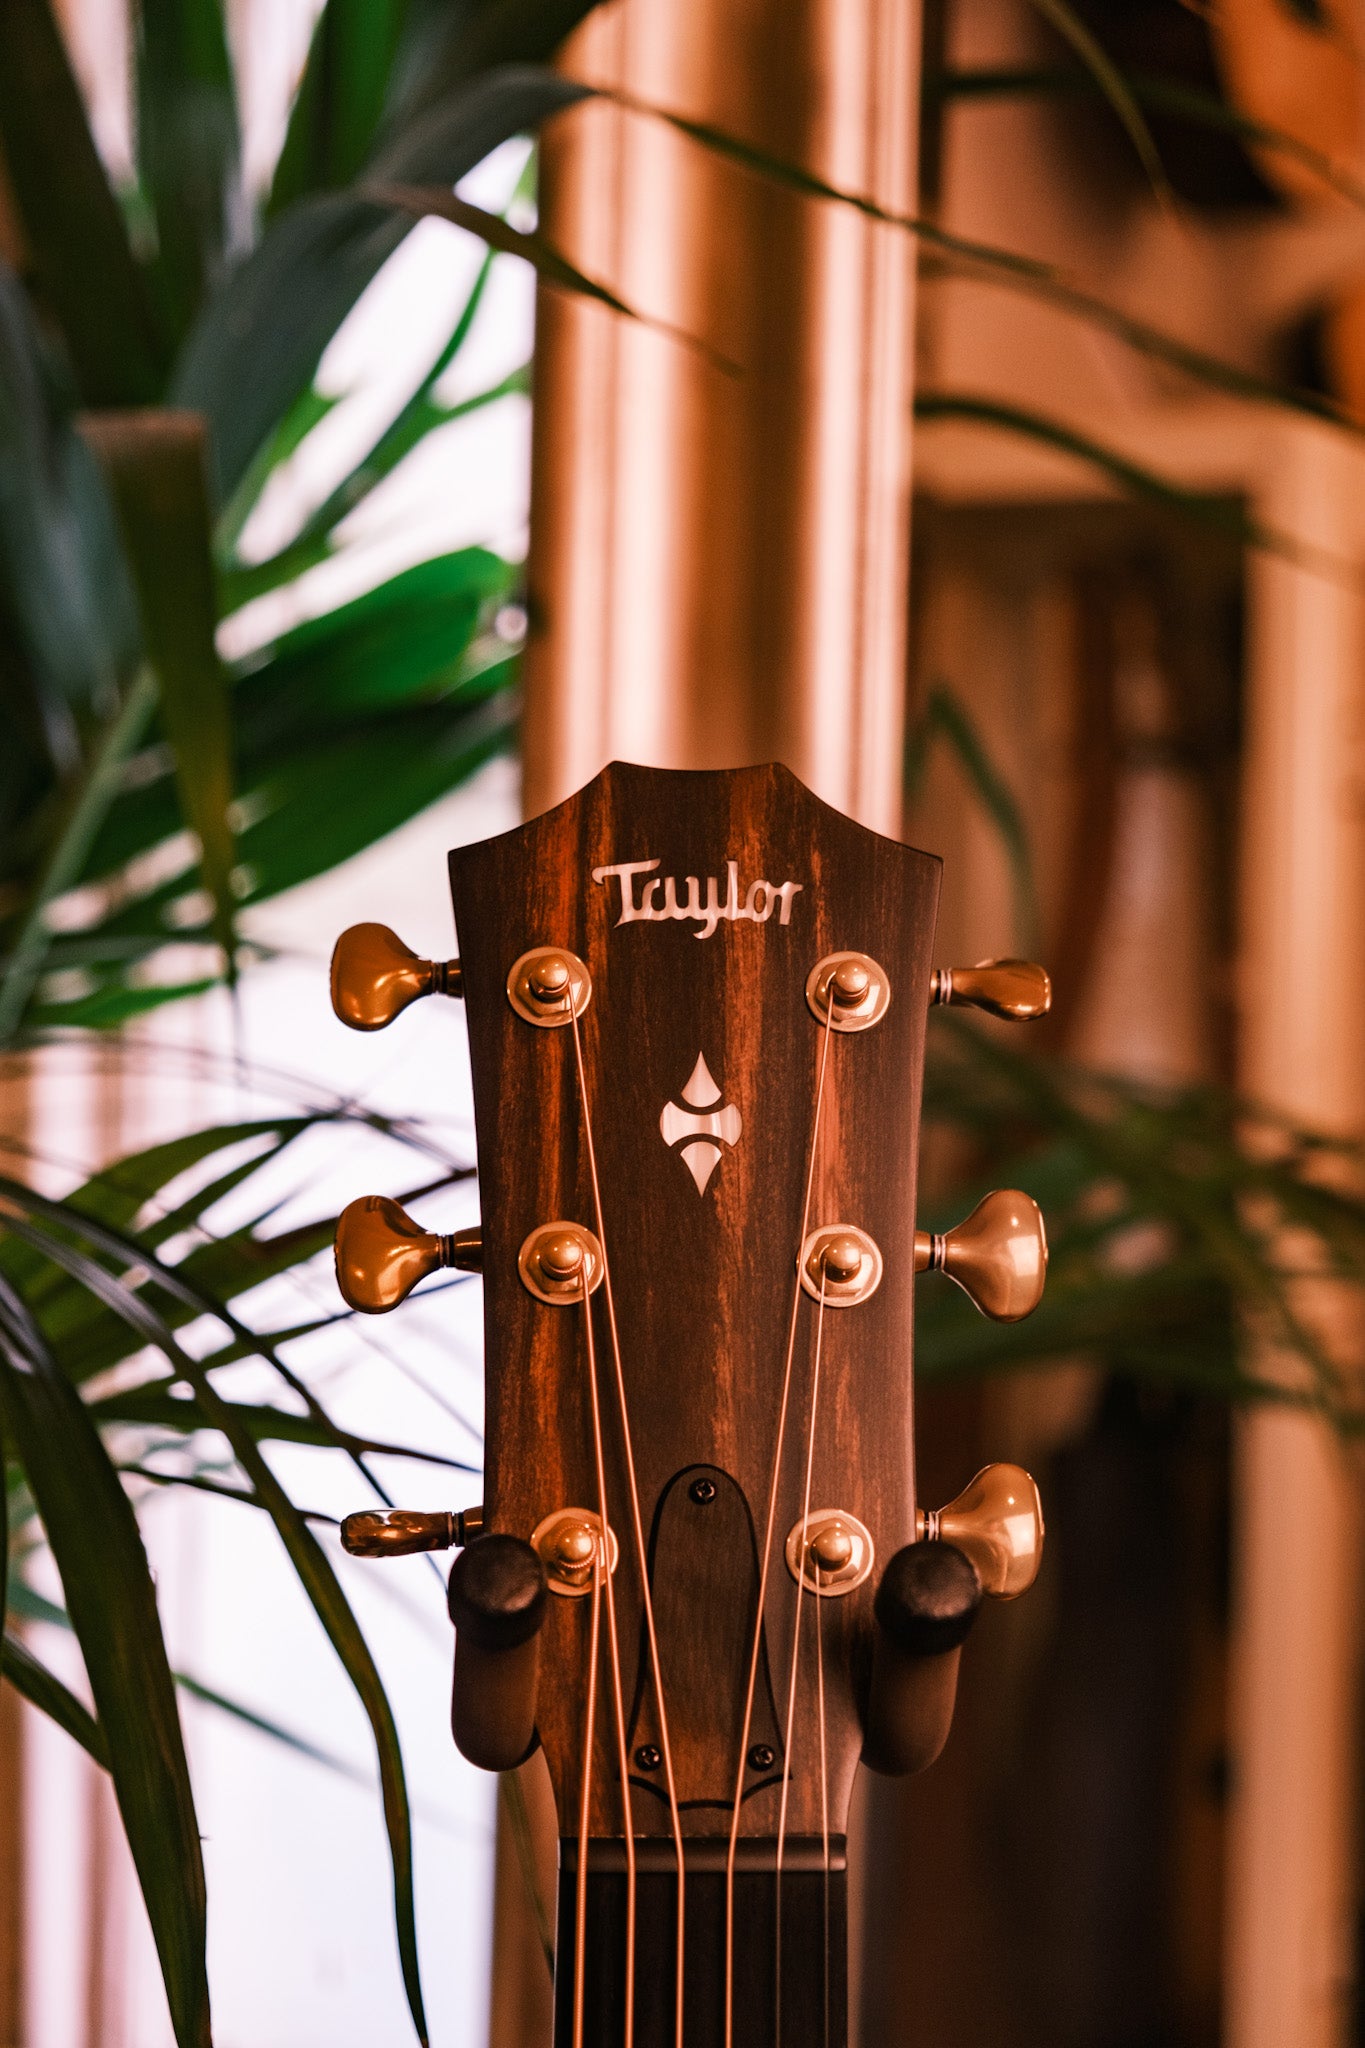 Taylor 324ce Builder's Edition